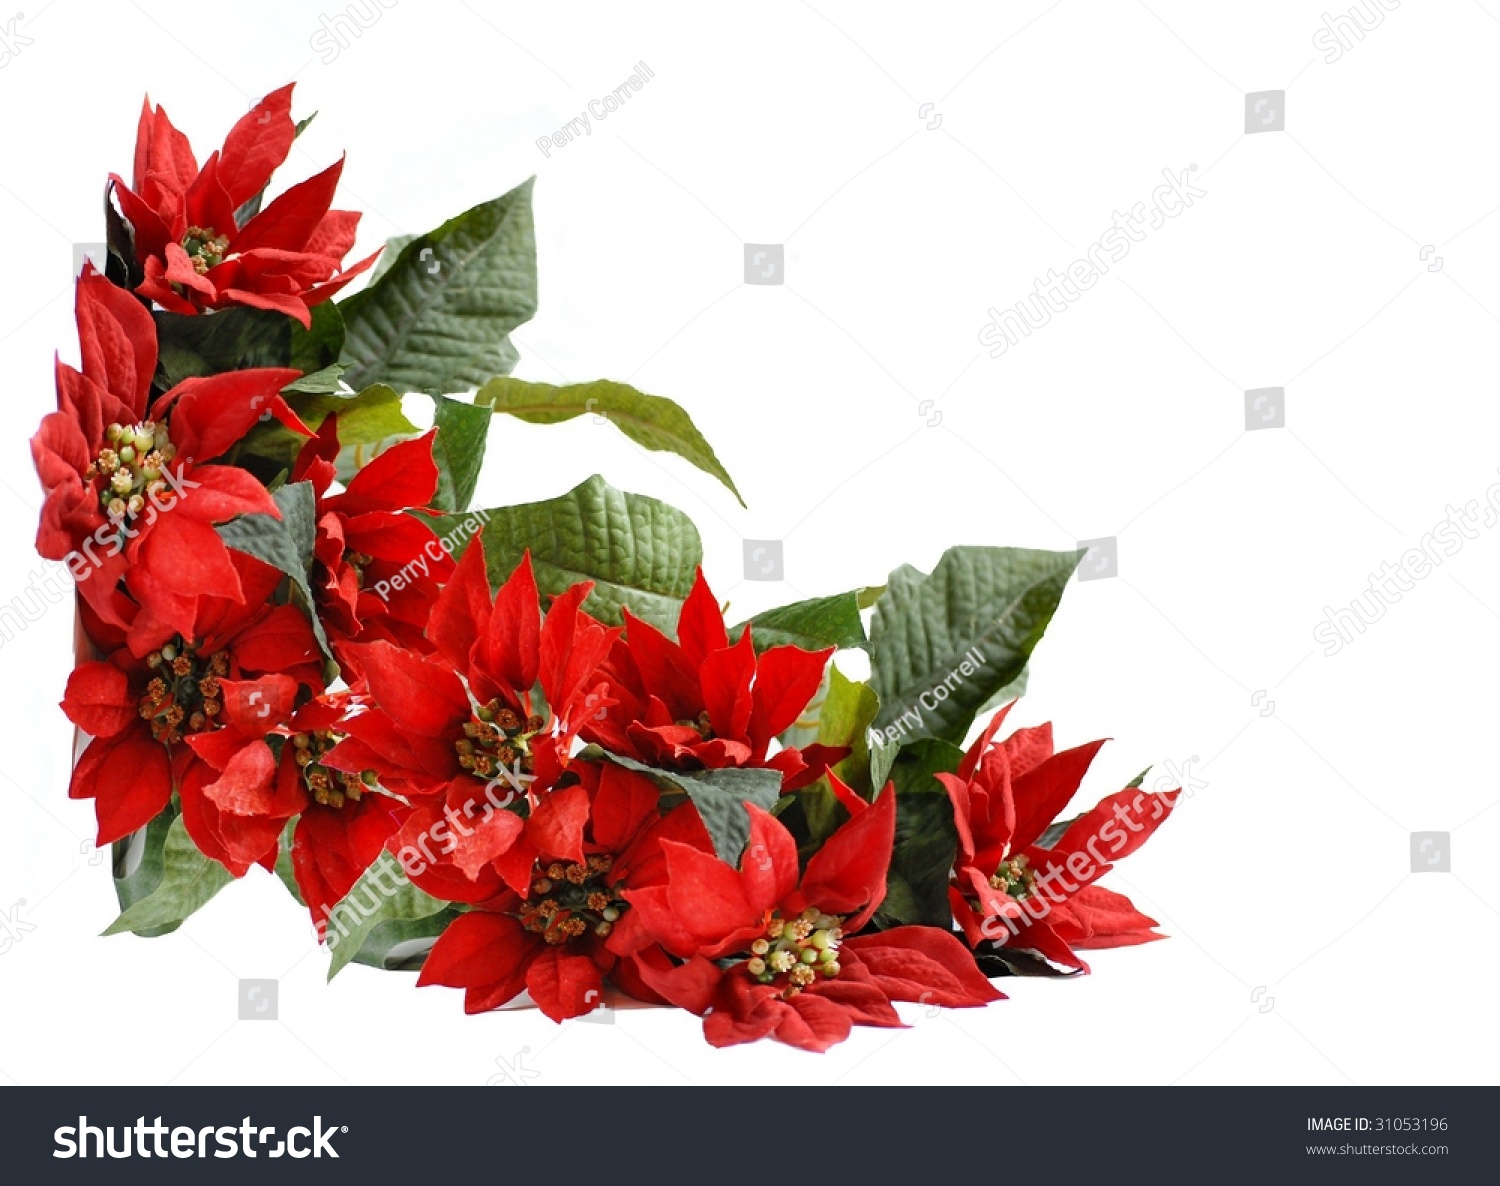 Christmas Corner Border Background With A Thick Arrangement Of Bright ...